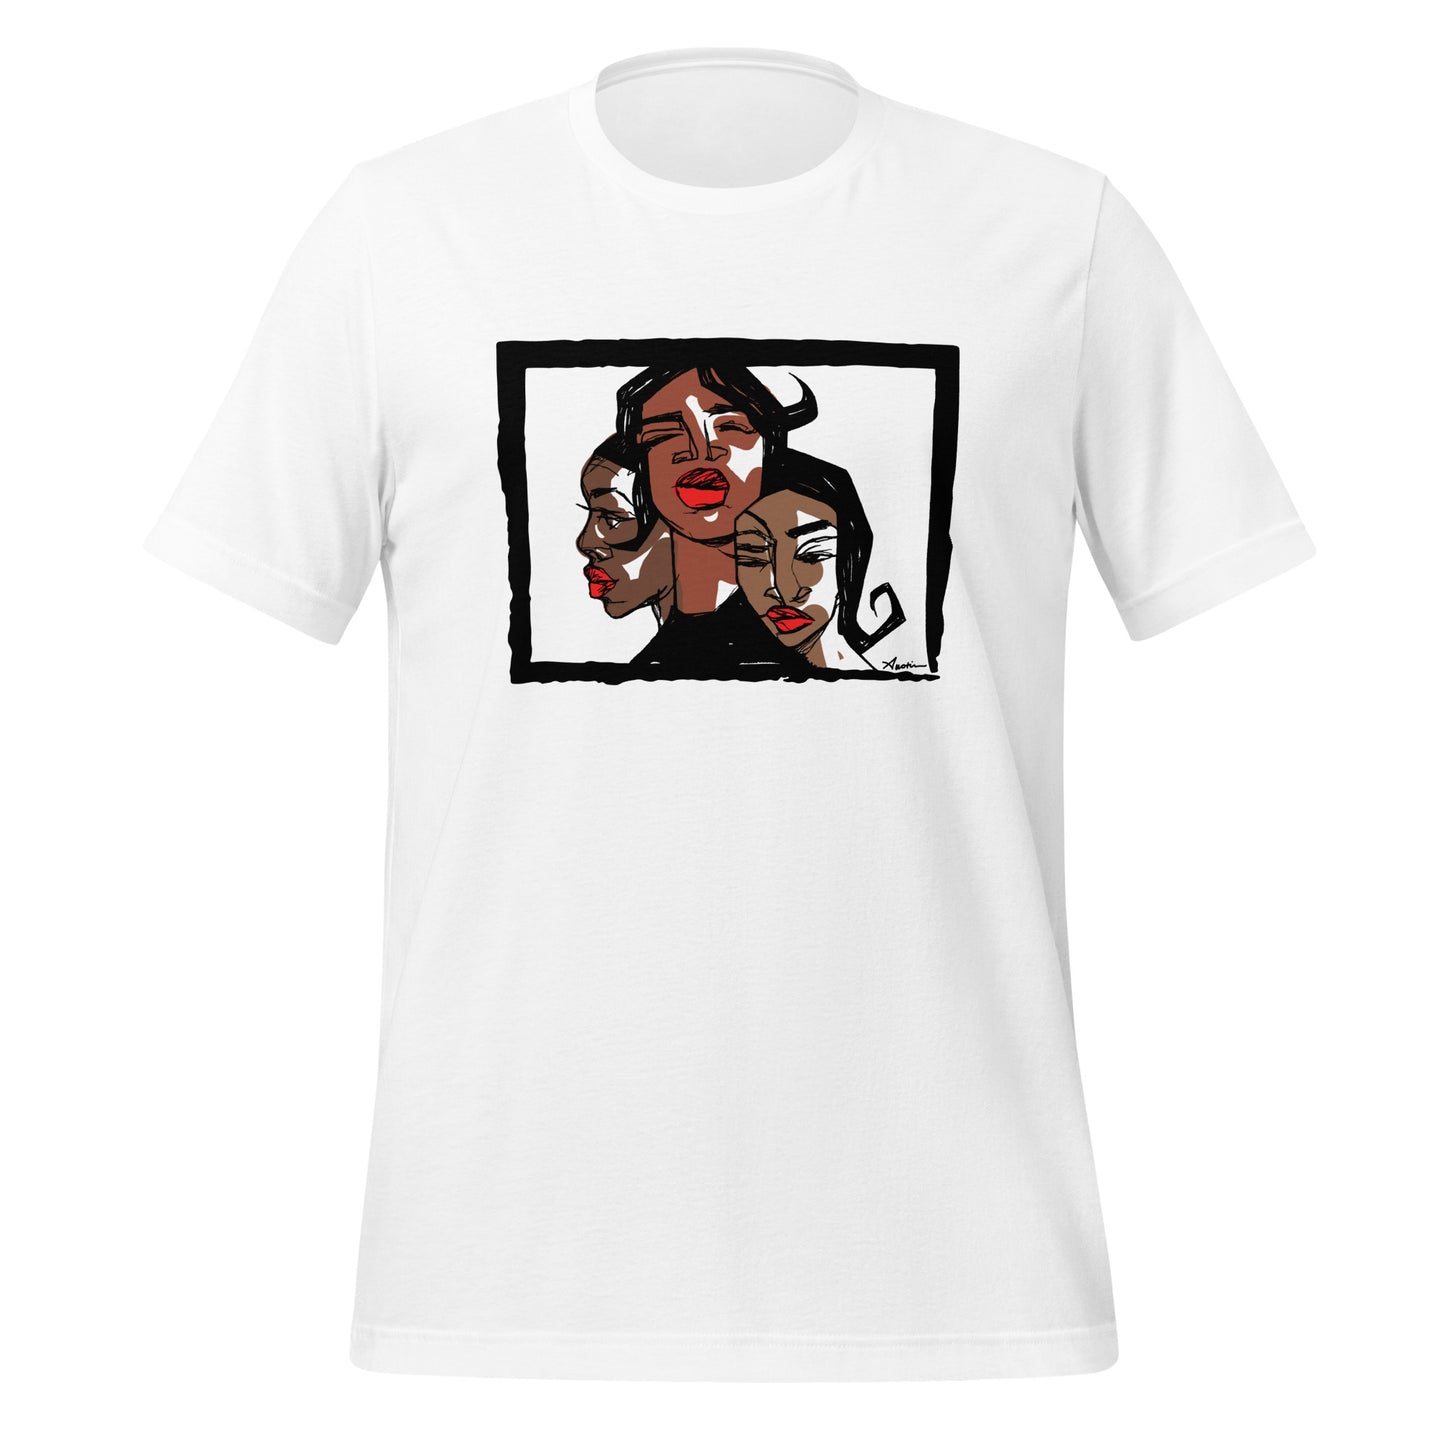 3 Sisters Adult T-shirt